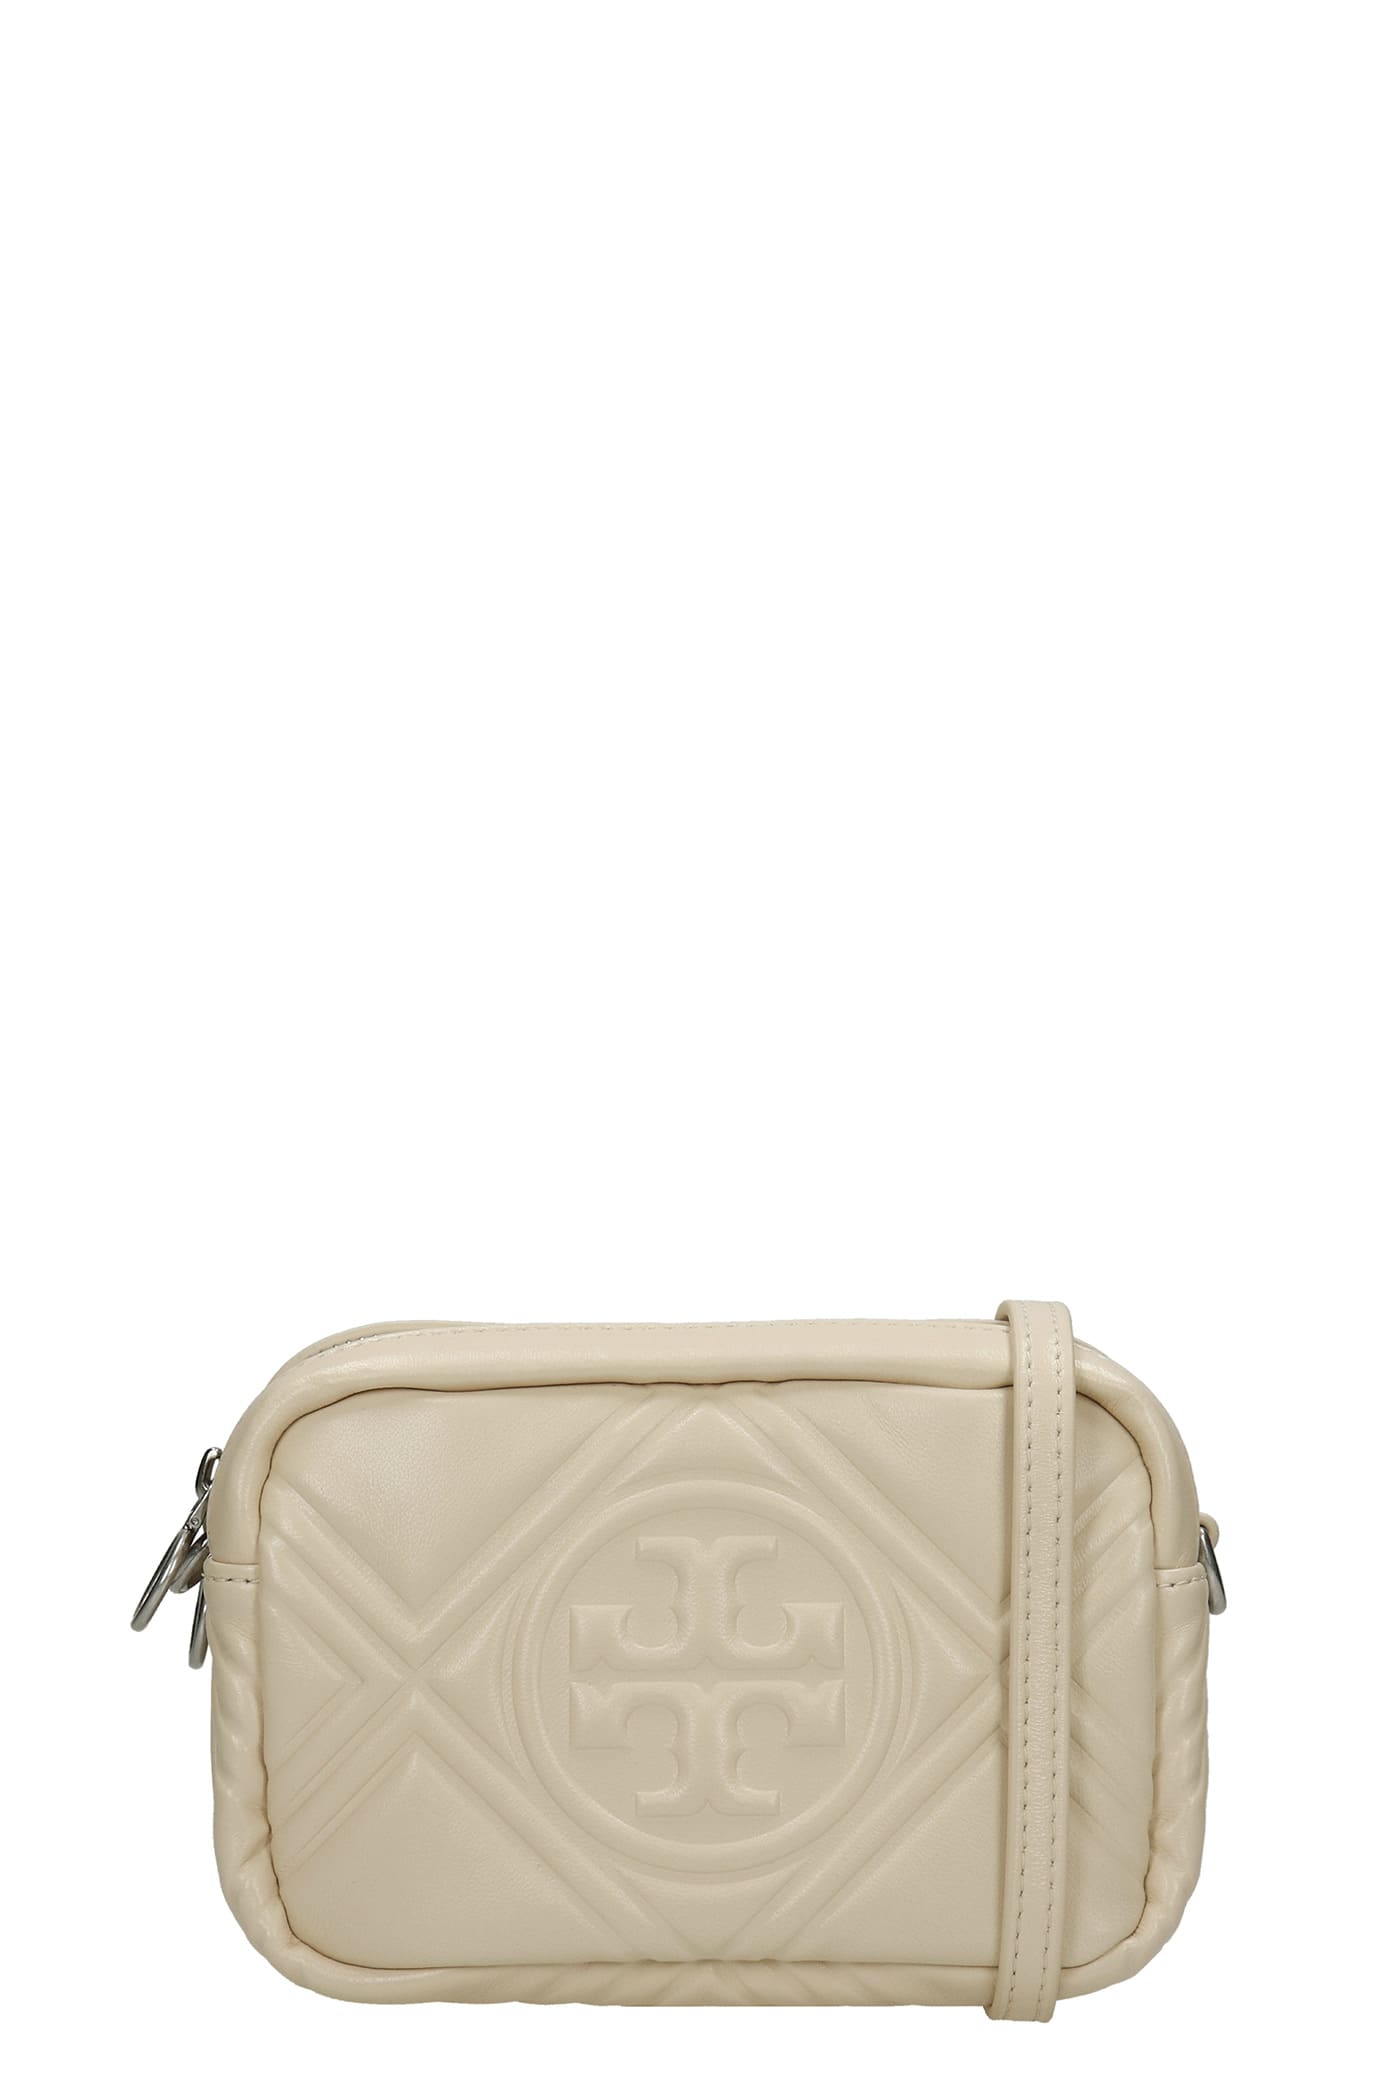 Tory Burch Perry Shoulder Bag In Beige Leather